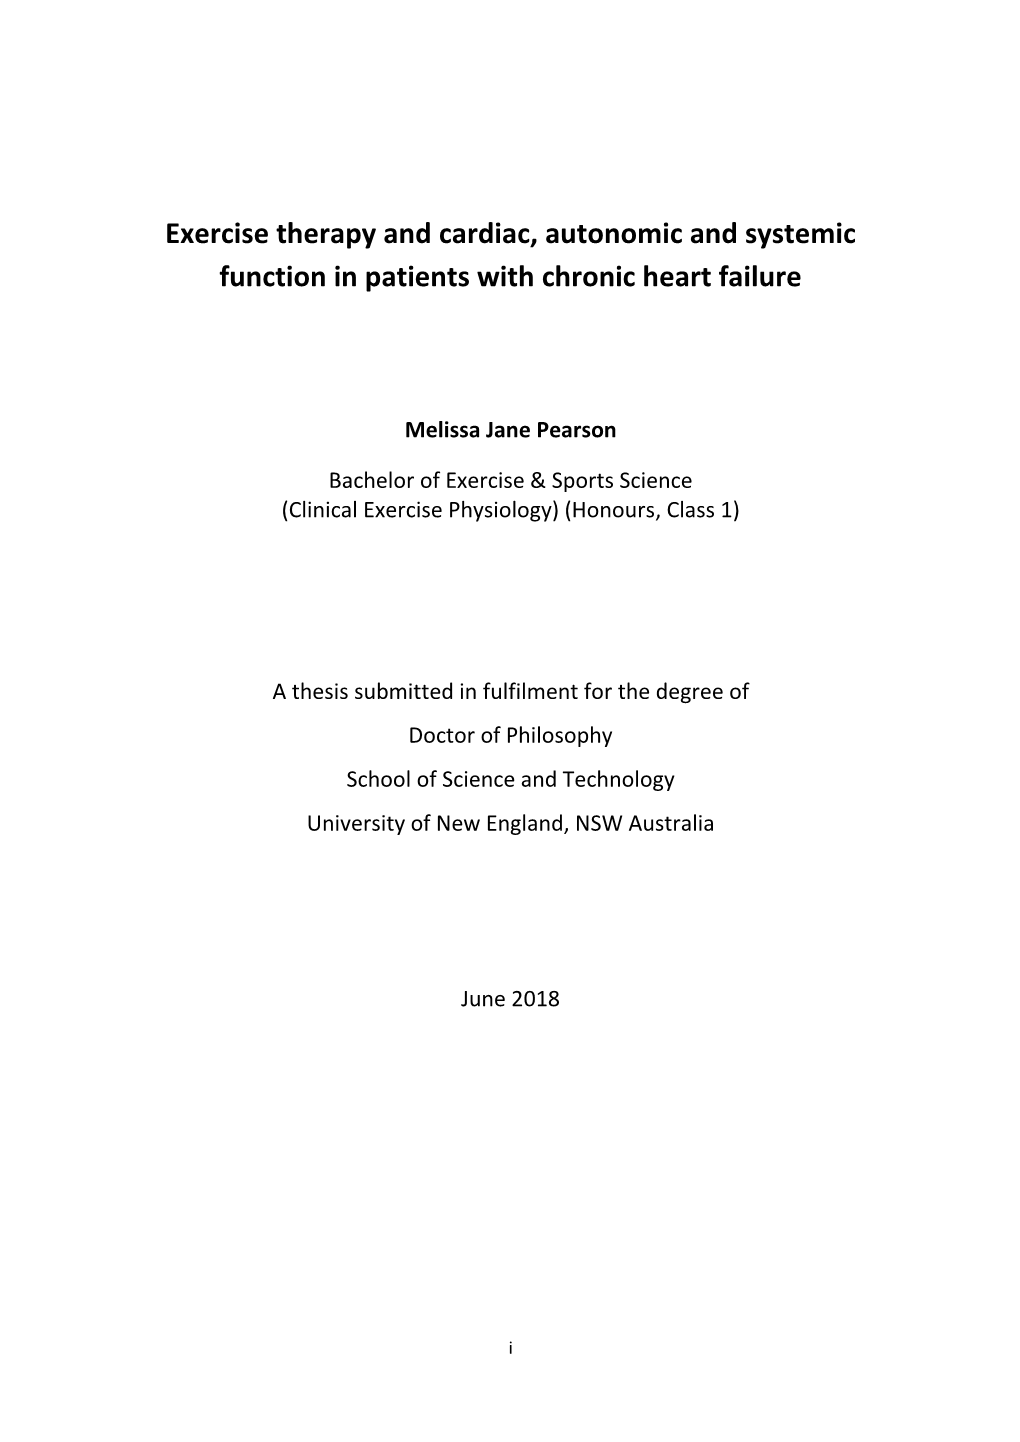 Exercise Therapy and Cardiac, Autonomic and Systemic Function in Patients with Chronic Heart Failure